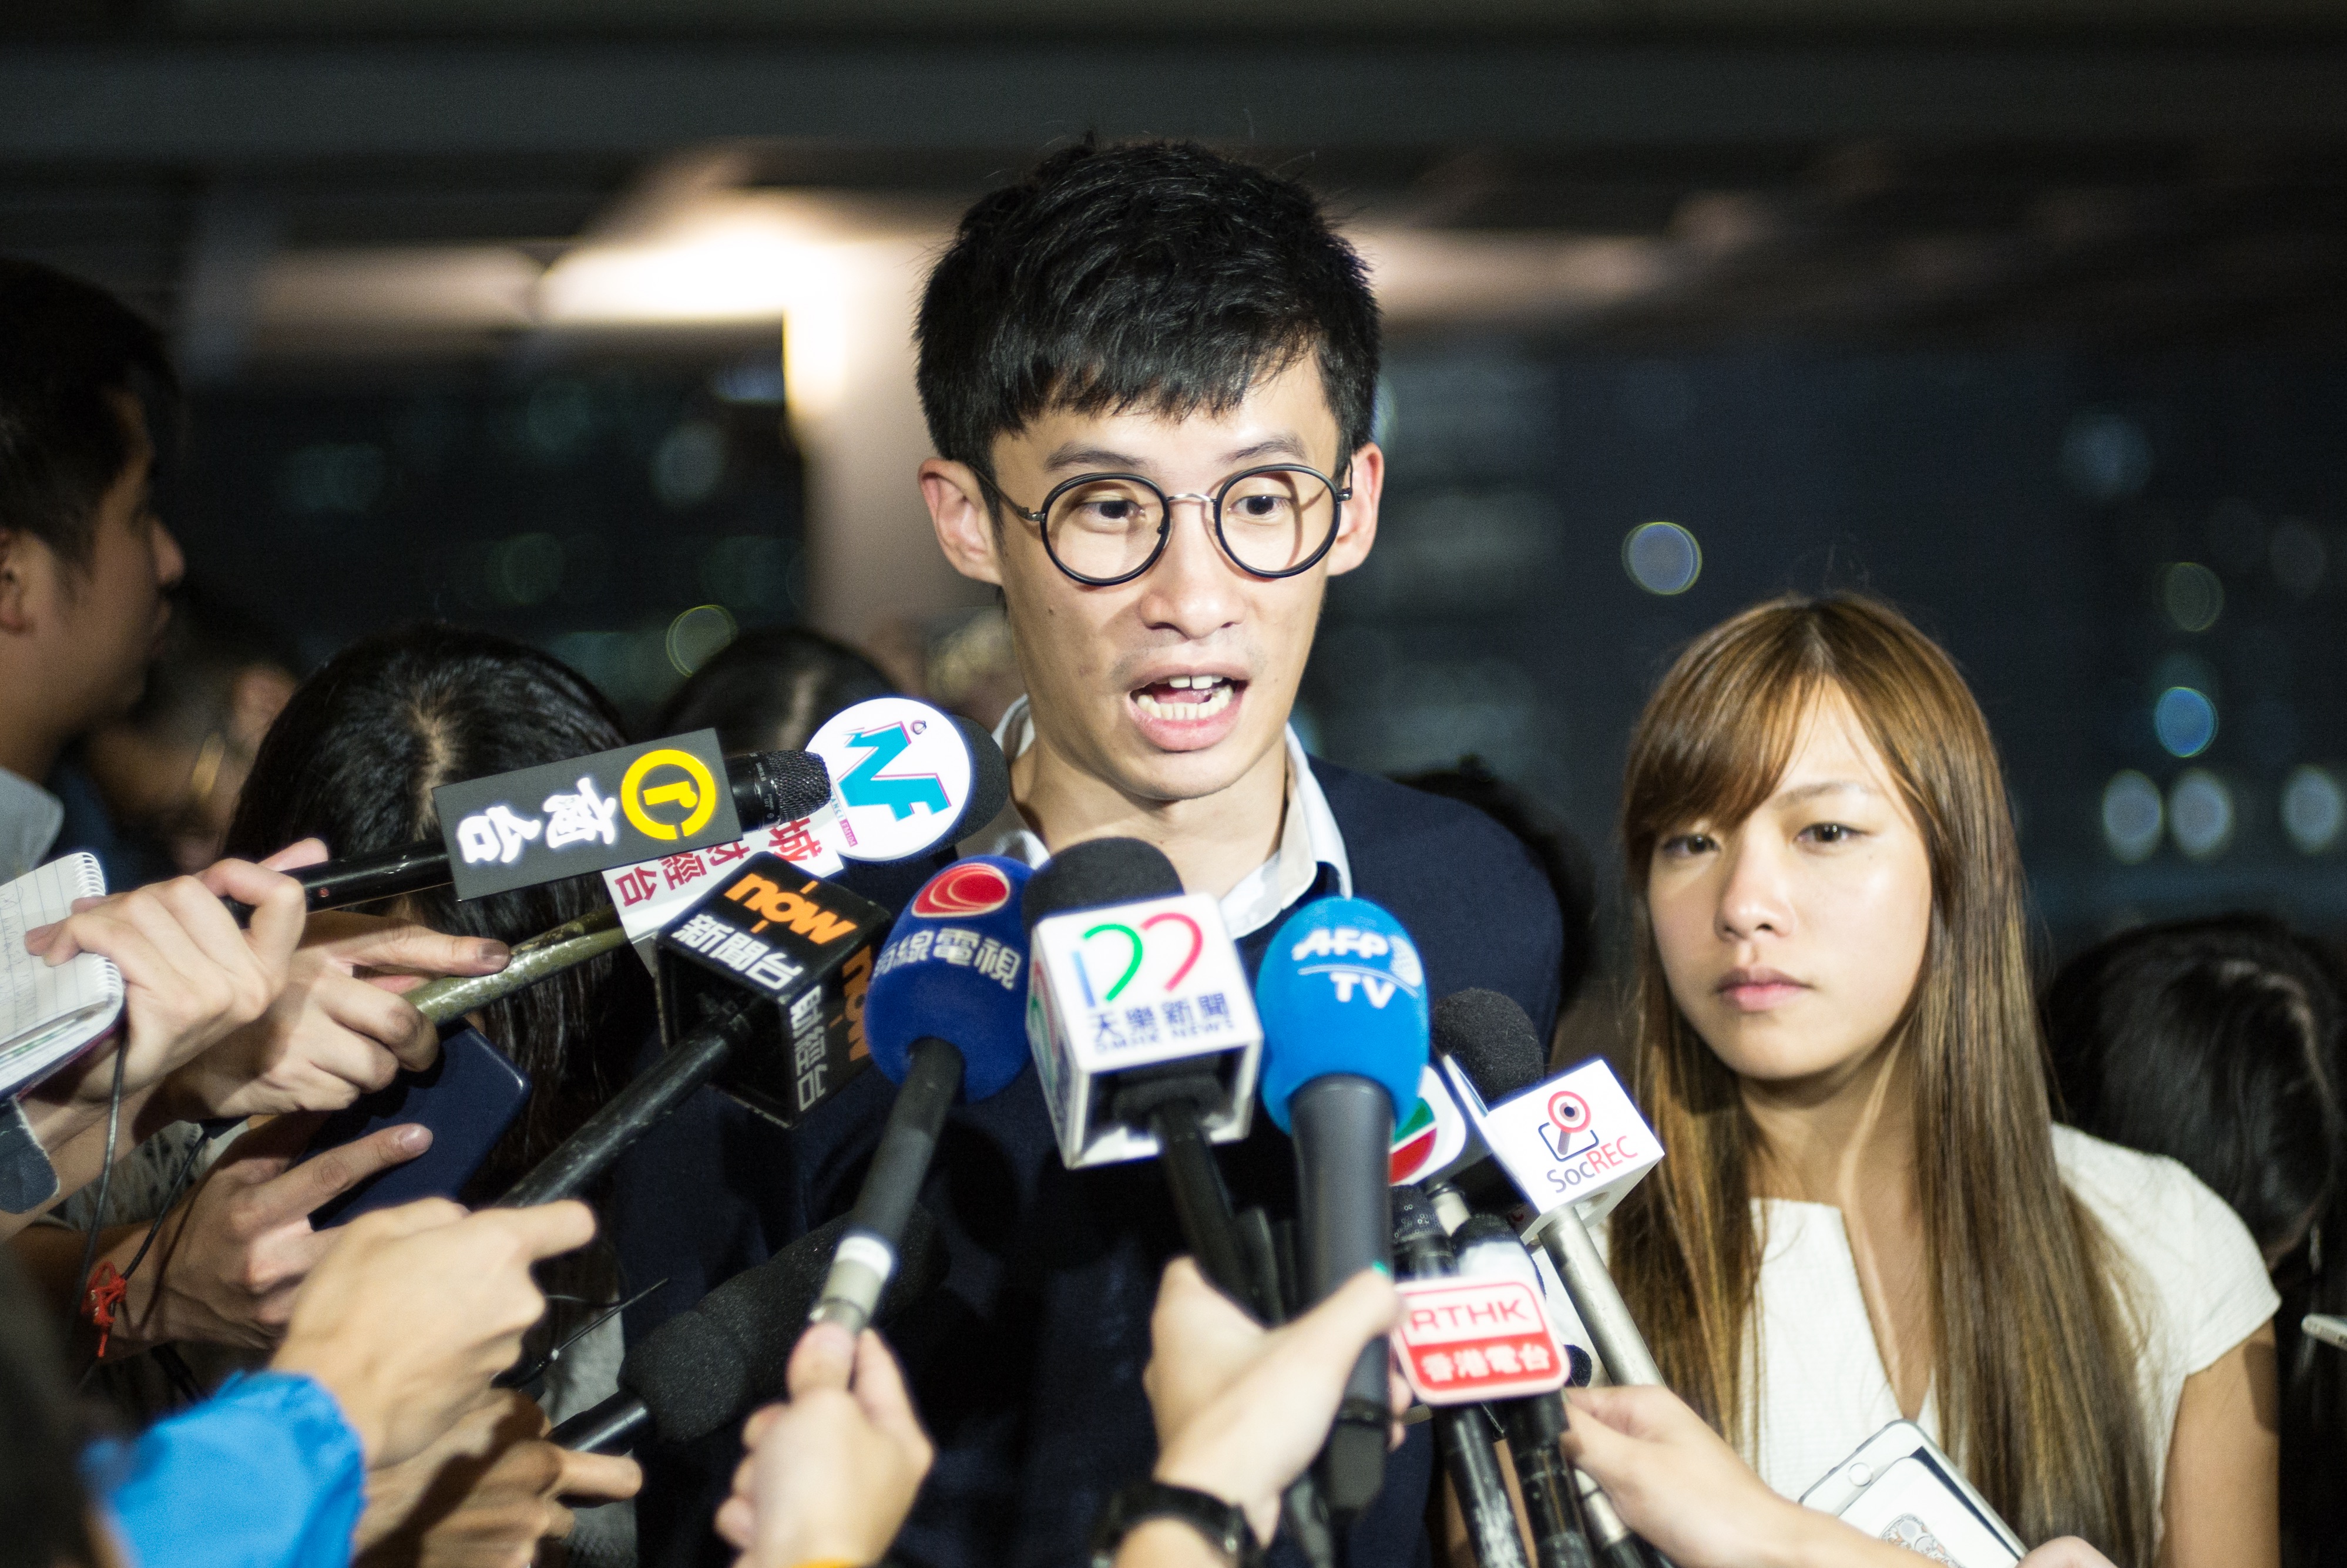 Newly-elected pro-independence Hong Kong lawmakers Sixtus "Baggio" Leung (C) and Yau Wai-ching (R) speak to the press outside the territory's High Court, Oct. 18, 2016. (Aaron Tam/AFP/Getty Images)